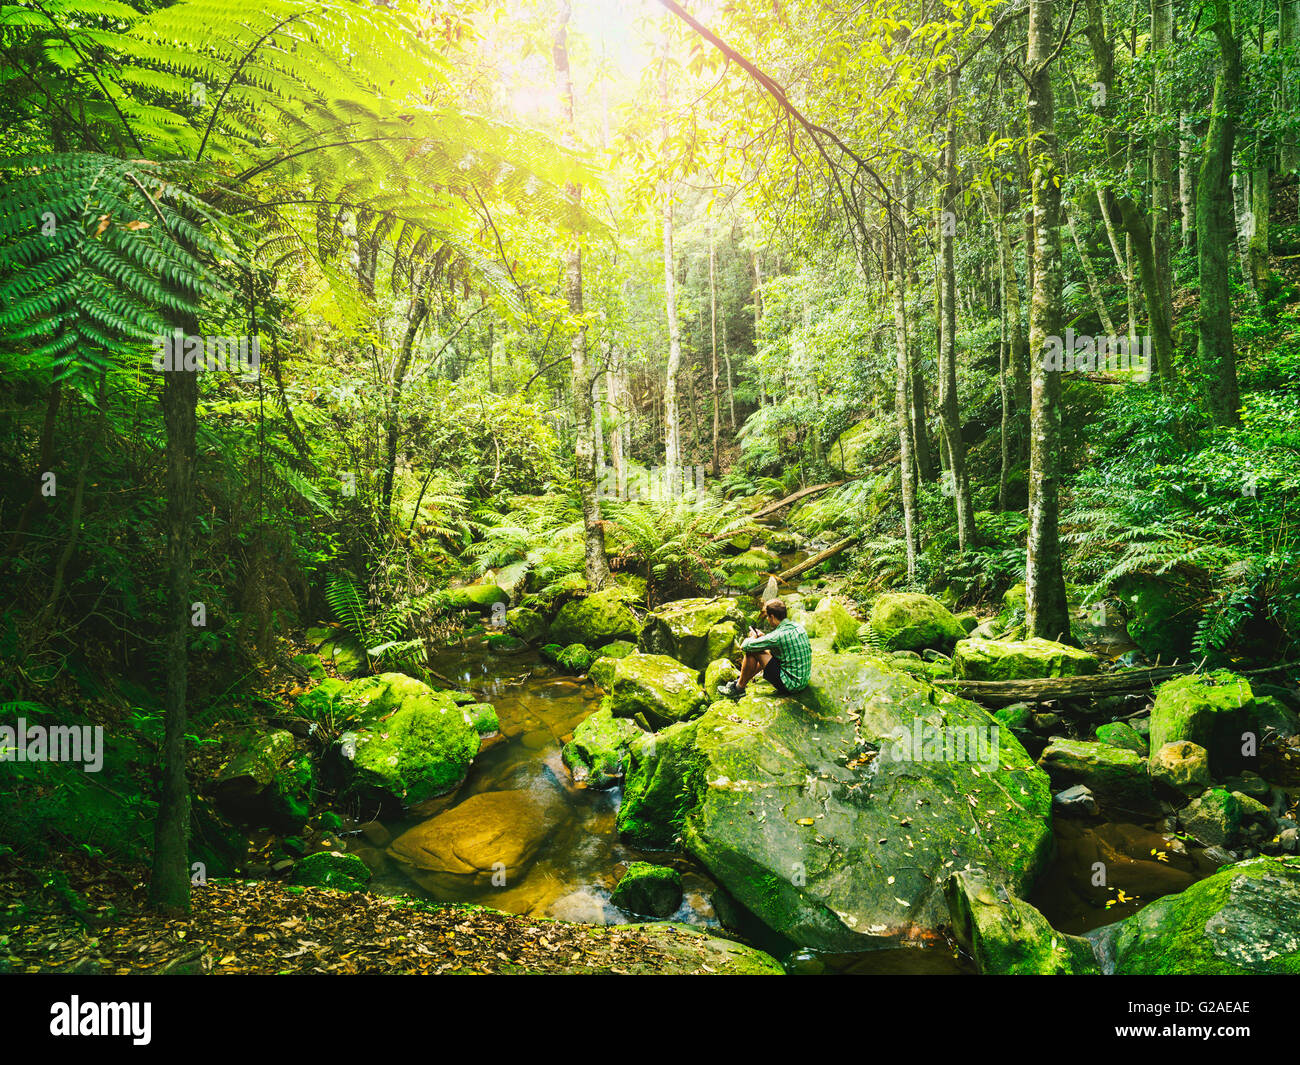 Mid adult man sitting on rock in green forest Stock Photo